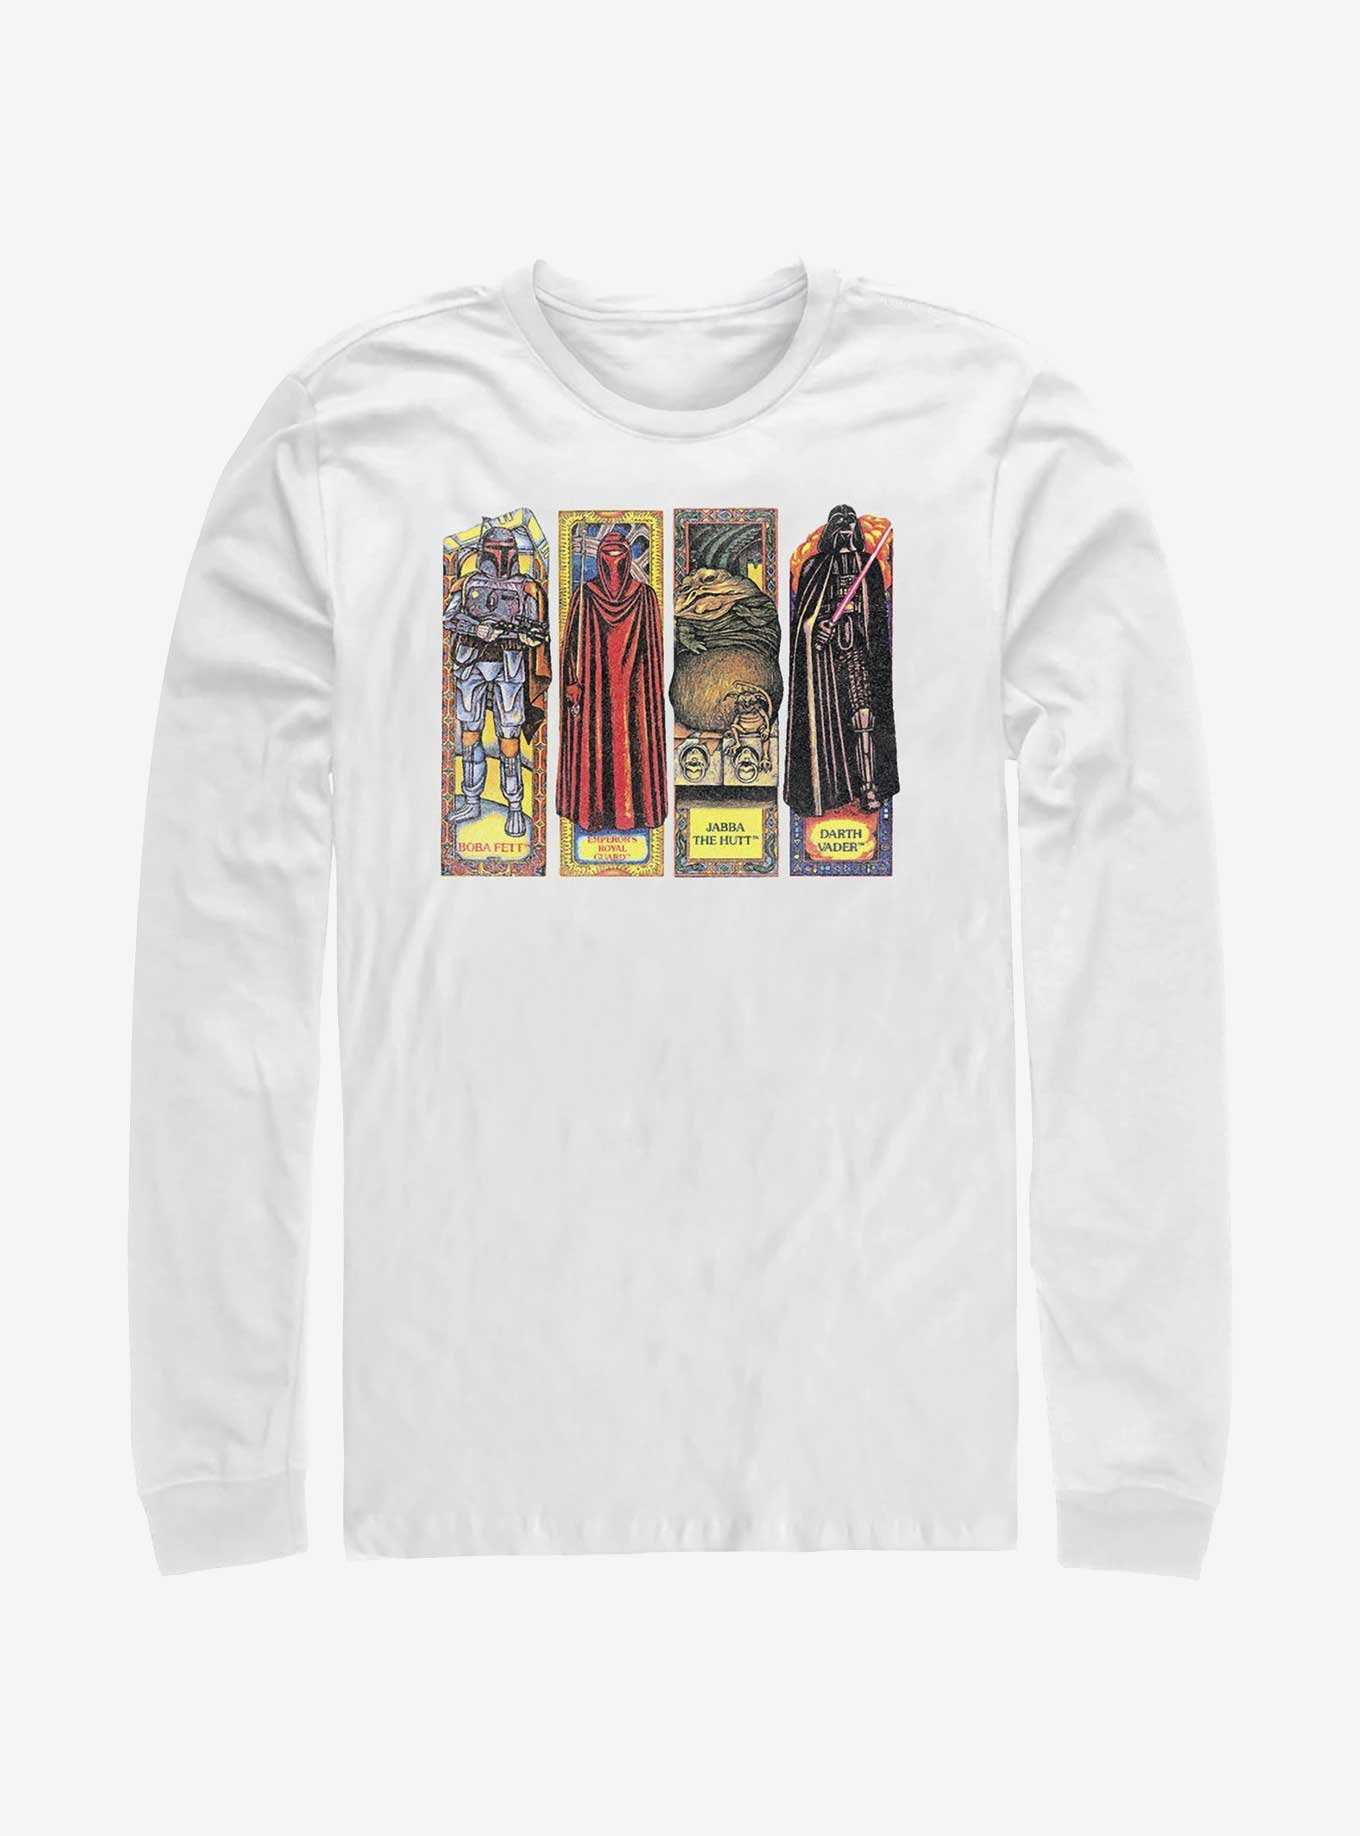 Star Wars Return of the Jedi 40th Anniversary Stained Glass Characters Long-Sleeve T-Shirt, , hi-res